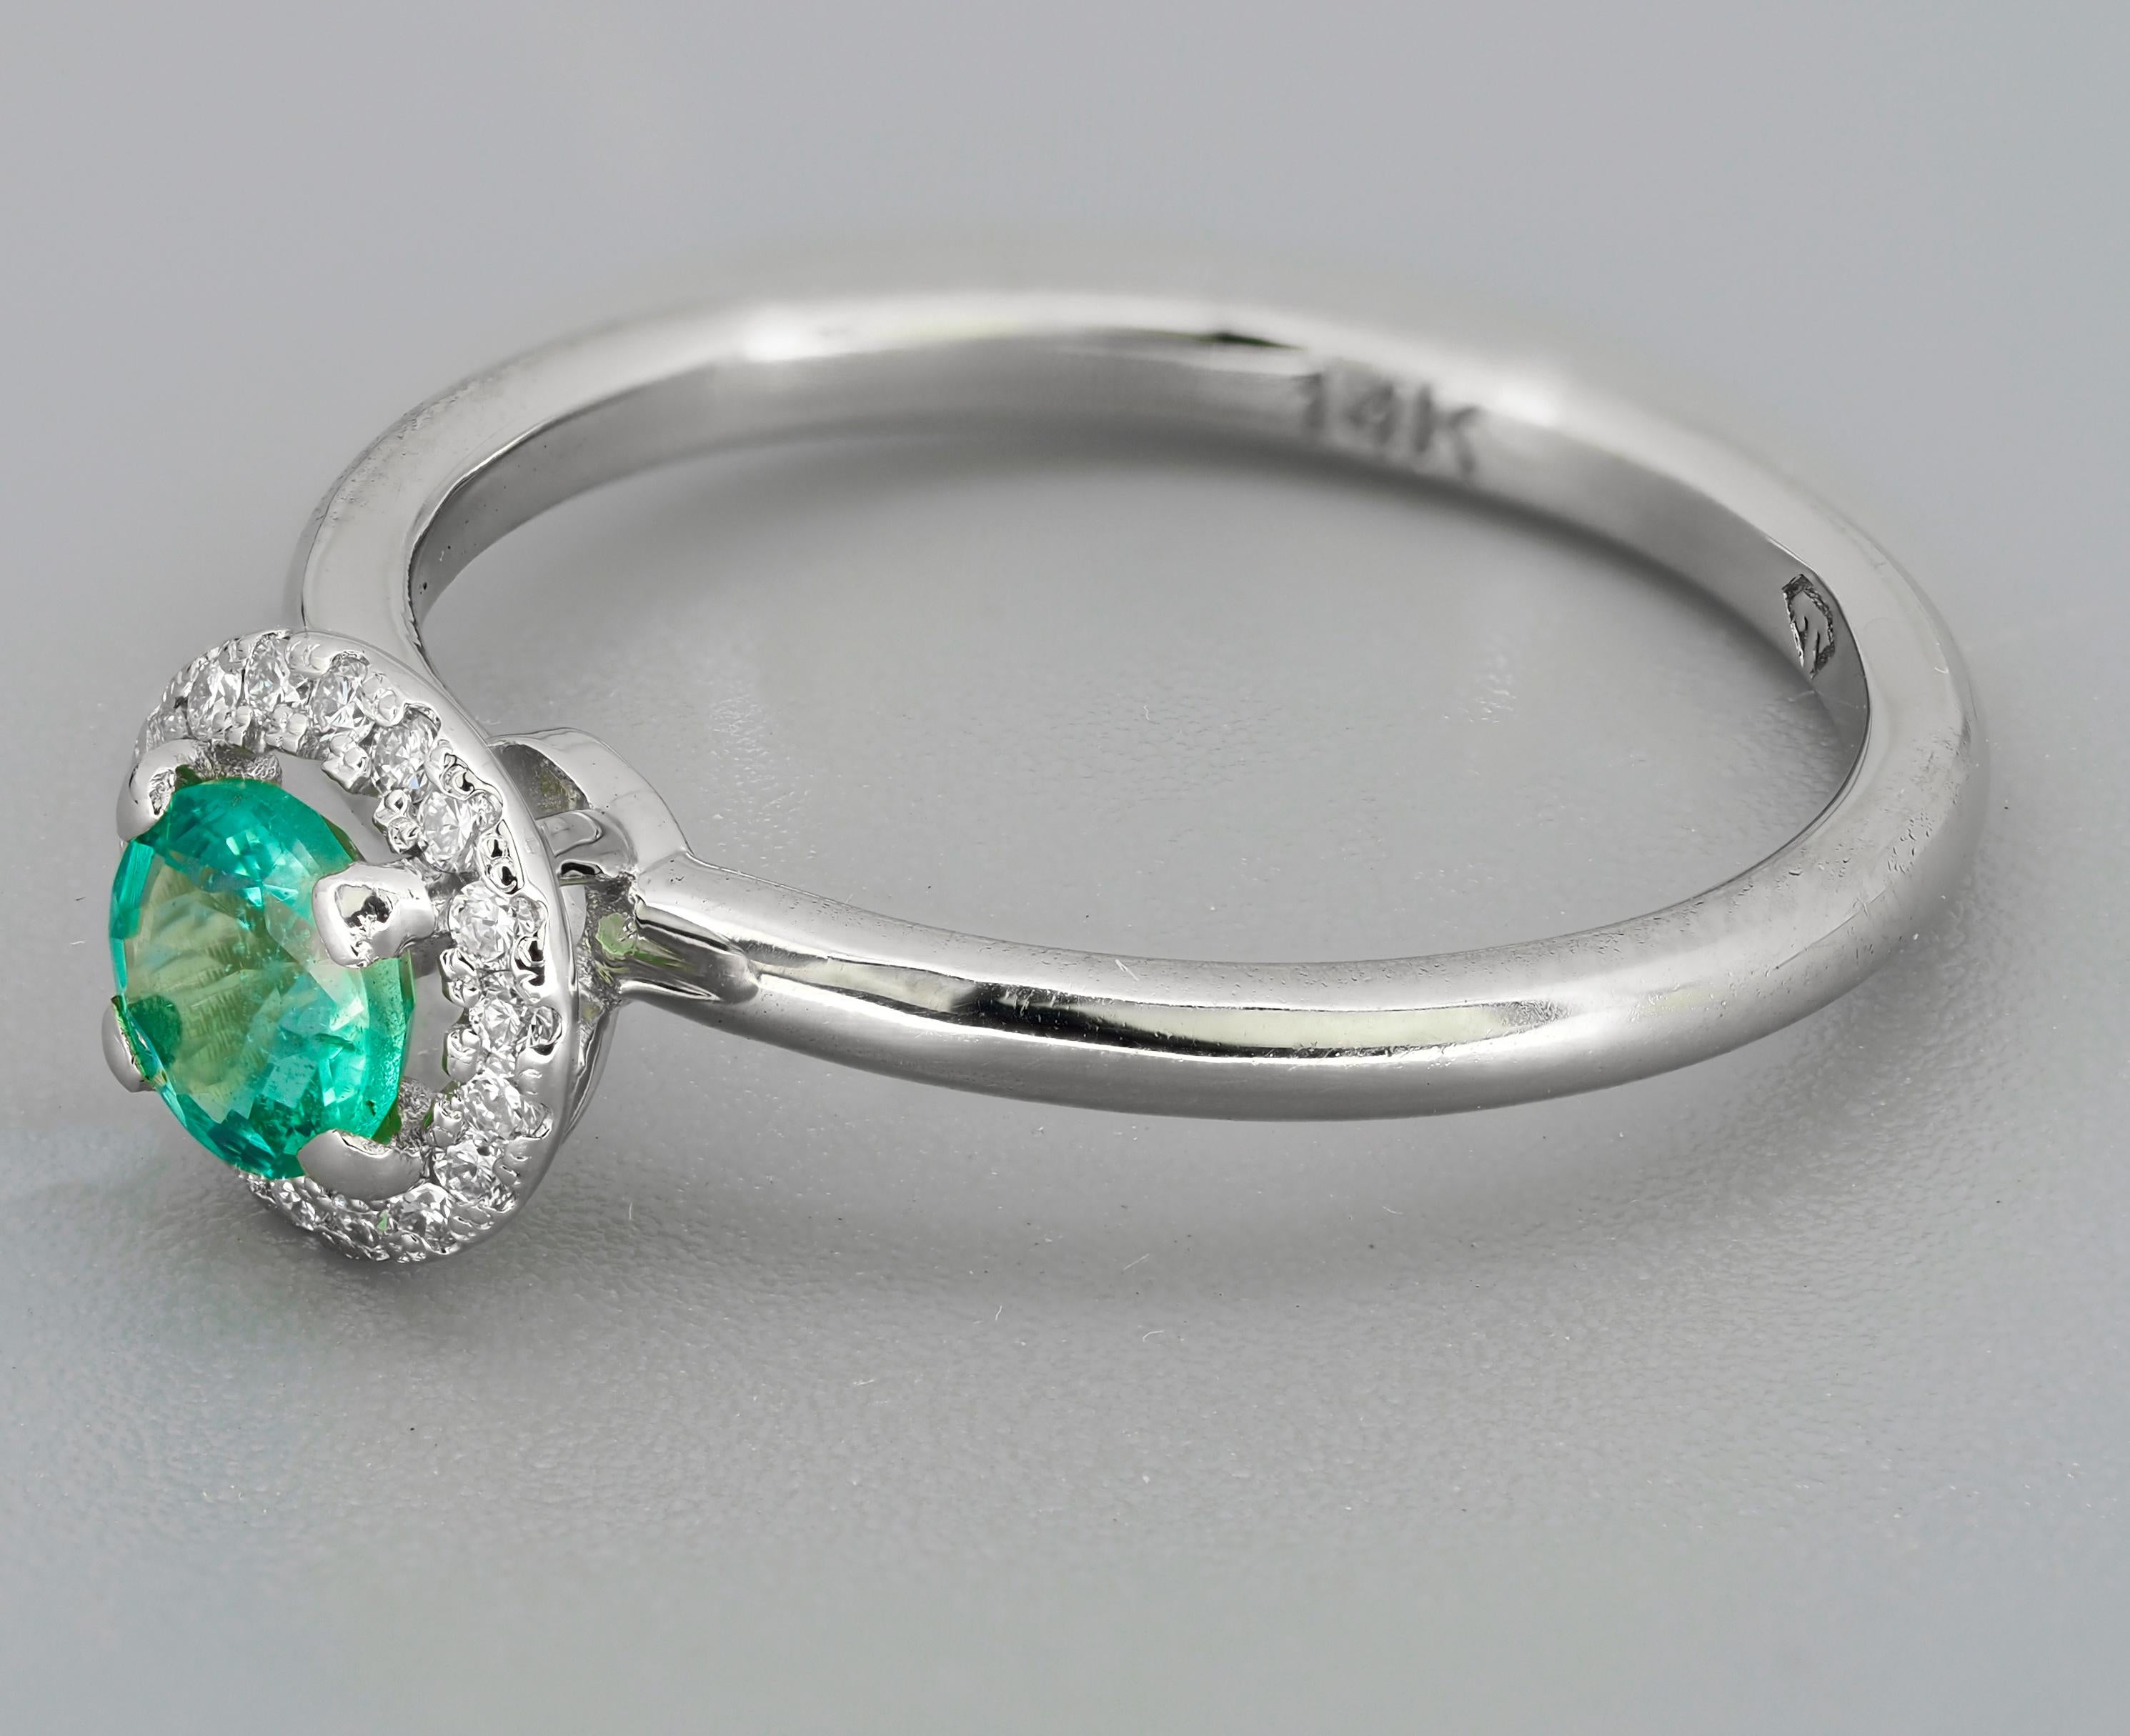 For Sale:  Emerald and Diamonds 14k gold ring.  Emerald Halo Gold Ring. 10